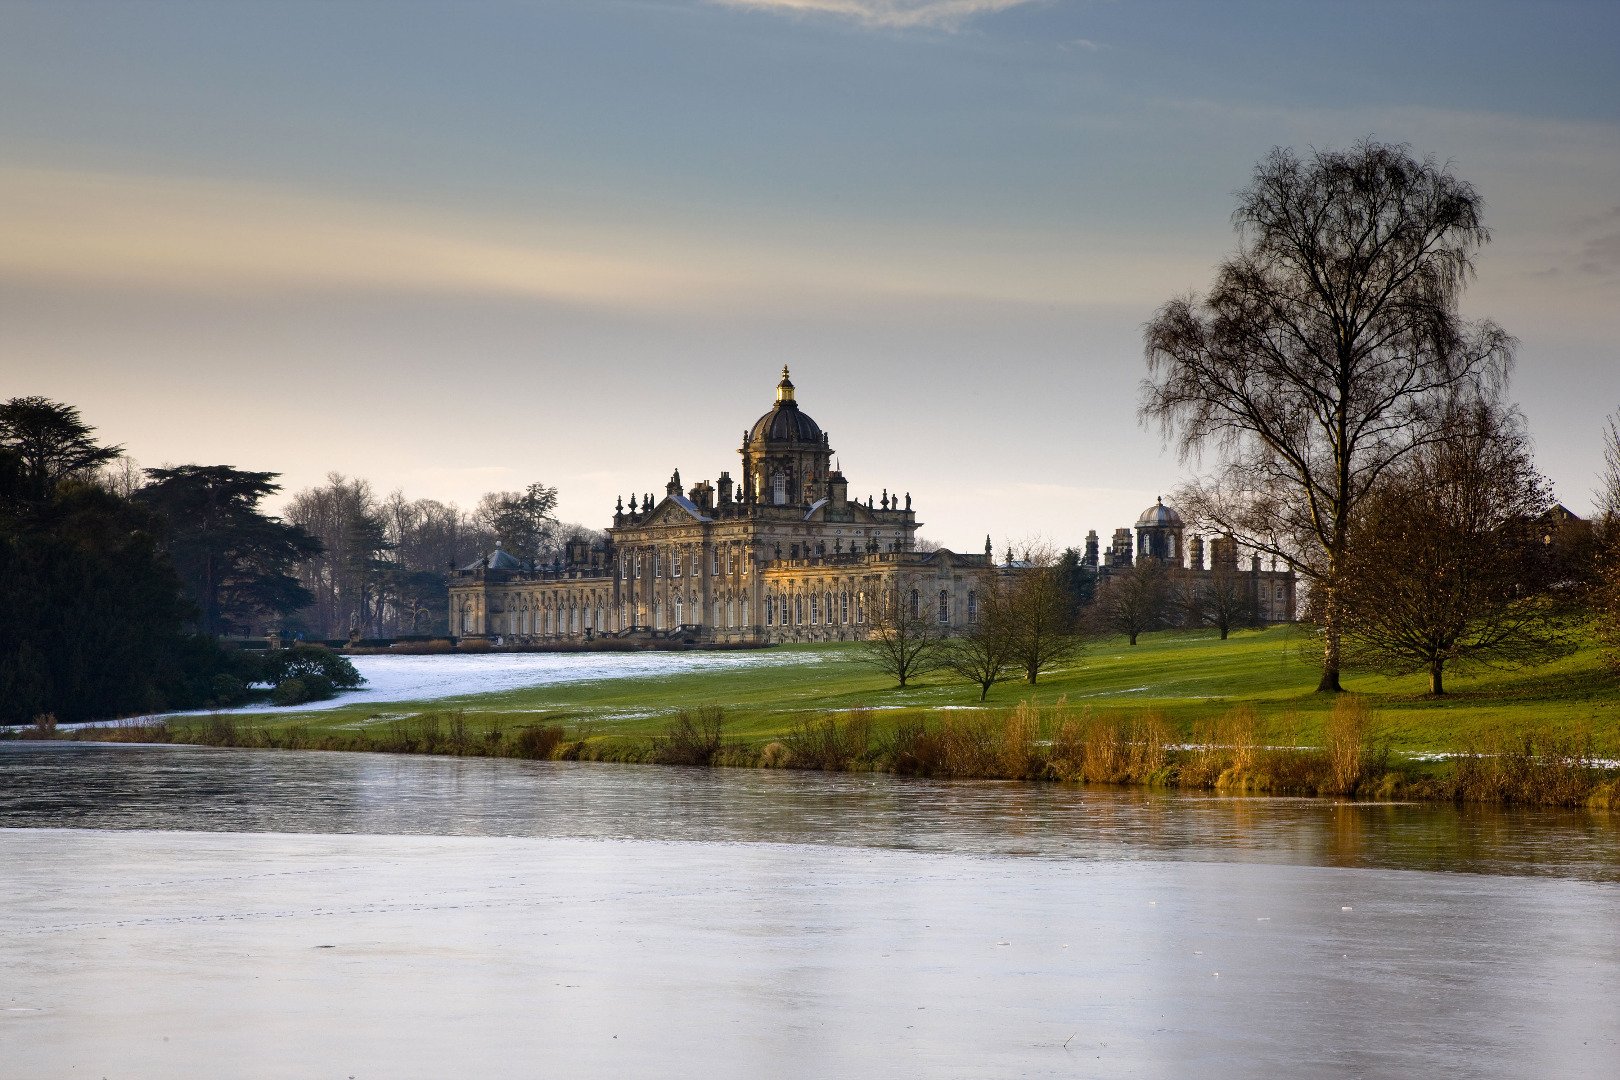 Image name castle howard and south lake mike kipling the 21 image from the post Yorkshire Stately Homes and Gardens in Yorkshire.com.